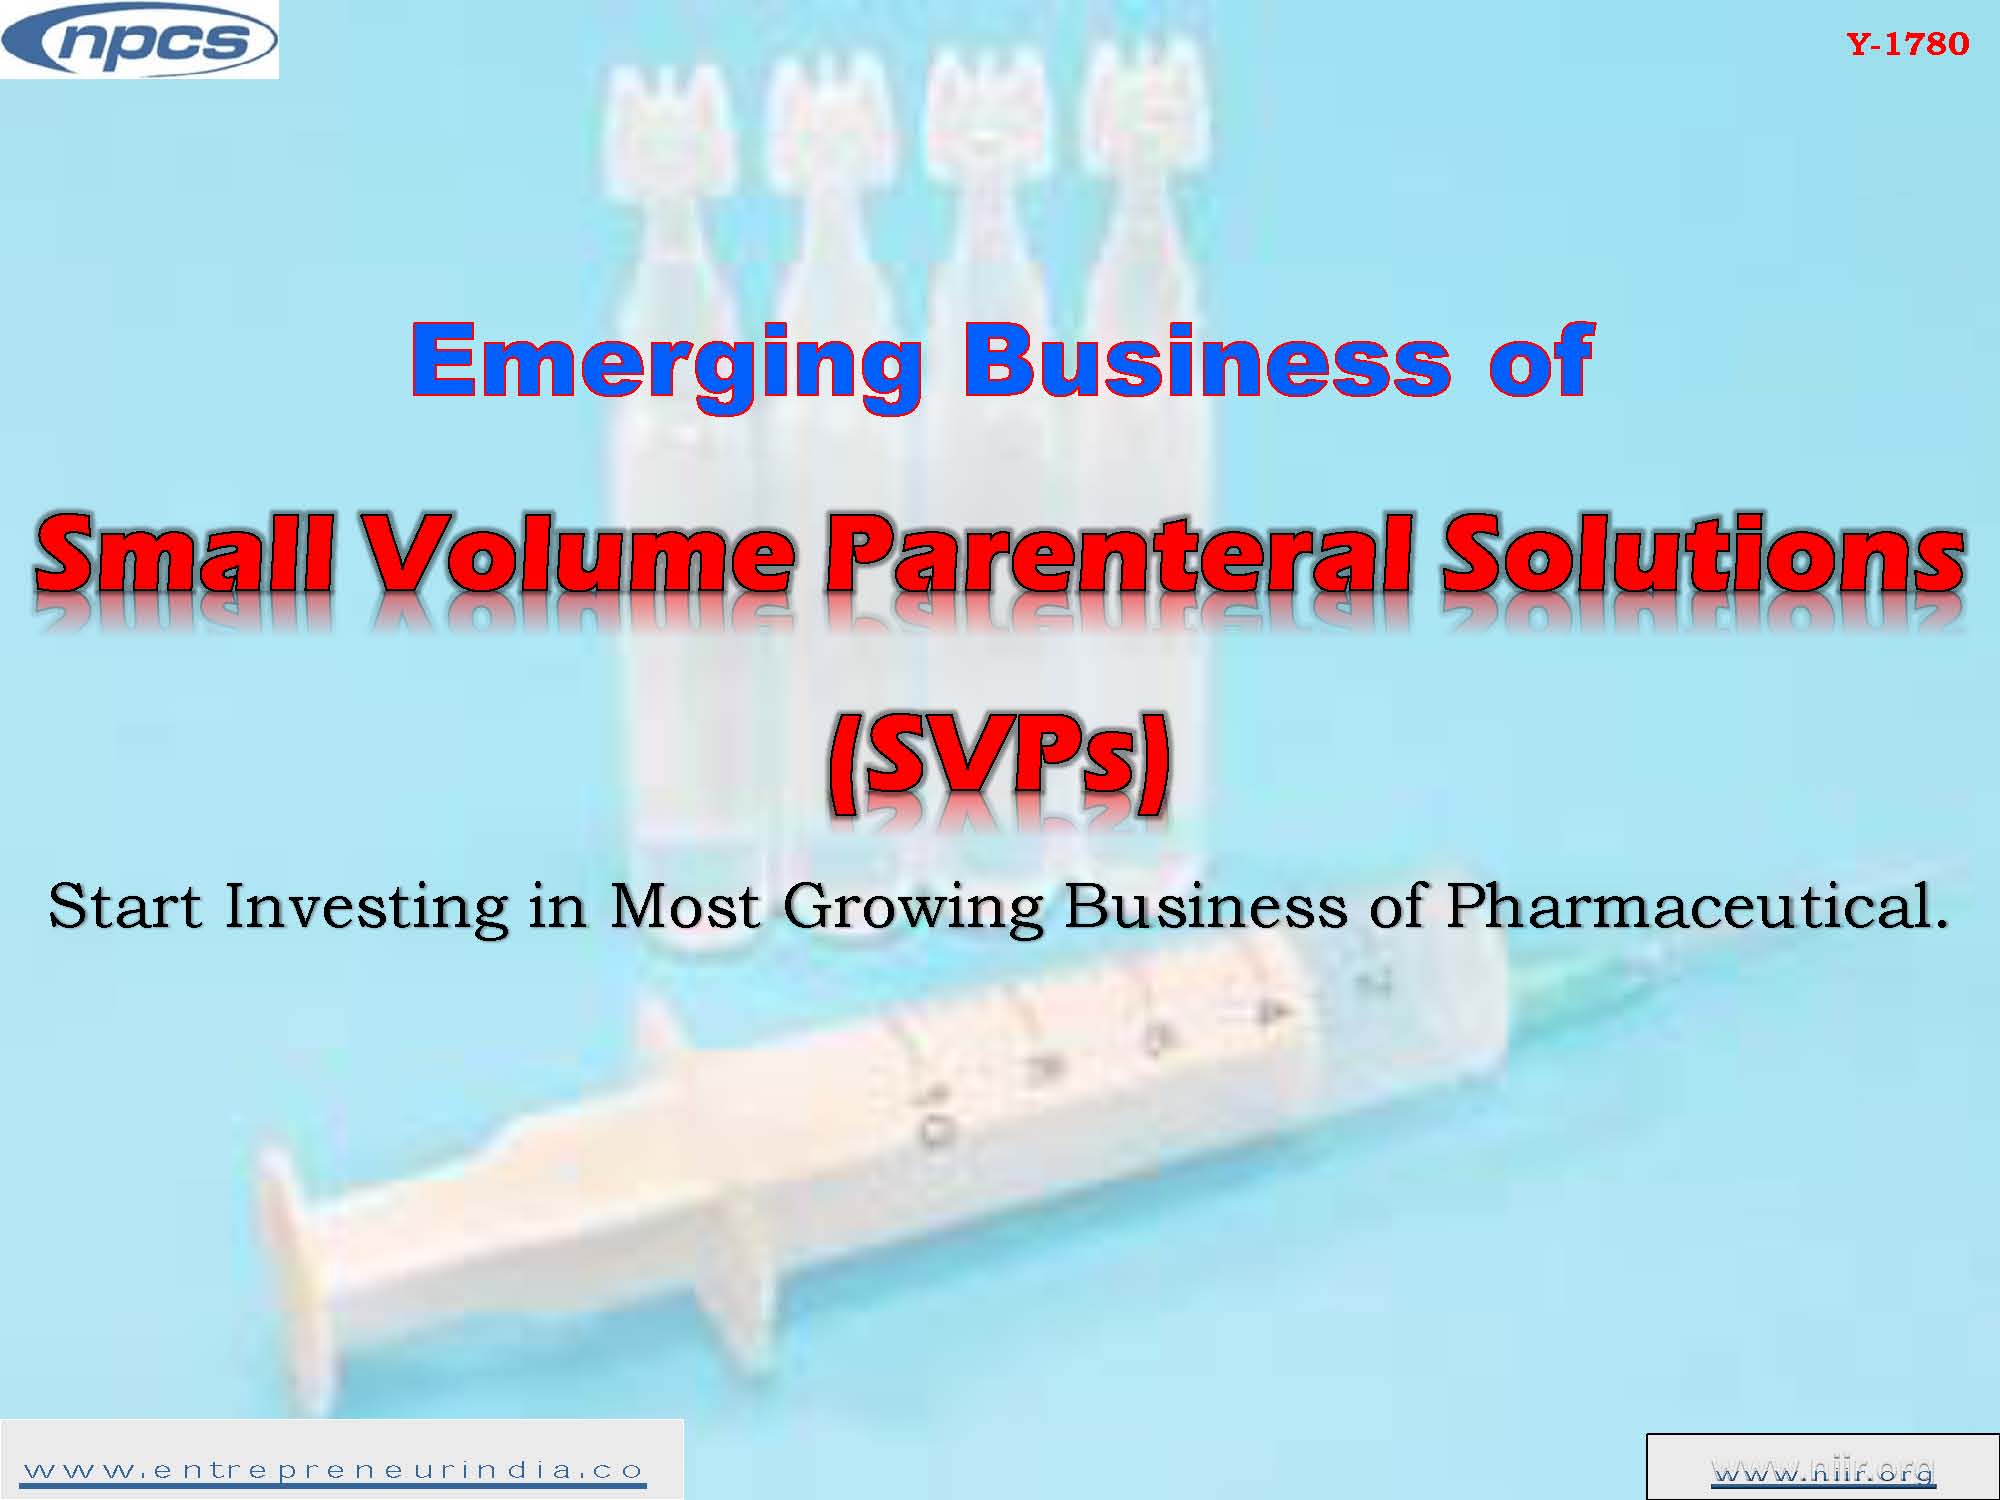 Emerging Business of Small Volume Parenteral Solutions SVPs Start Investing in Most Growing Business of Pharmaceutical